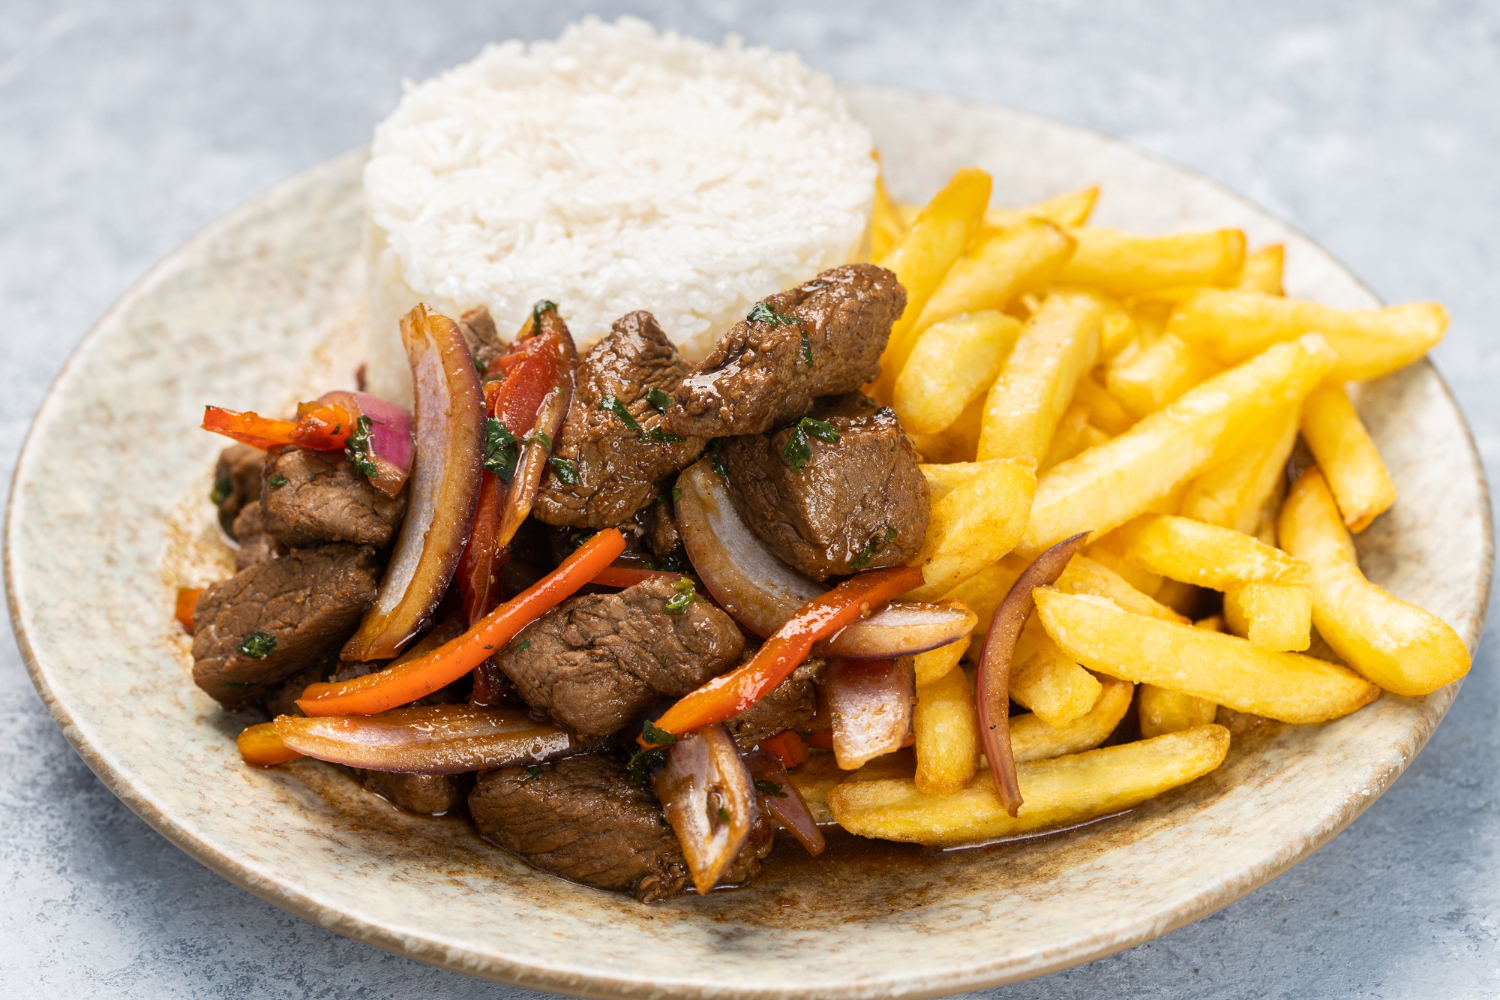 closeup of roasted meat with sauce vegetables and fries in a plate on the table